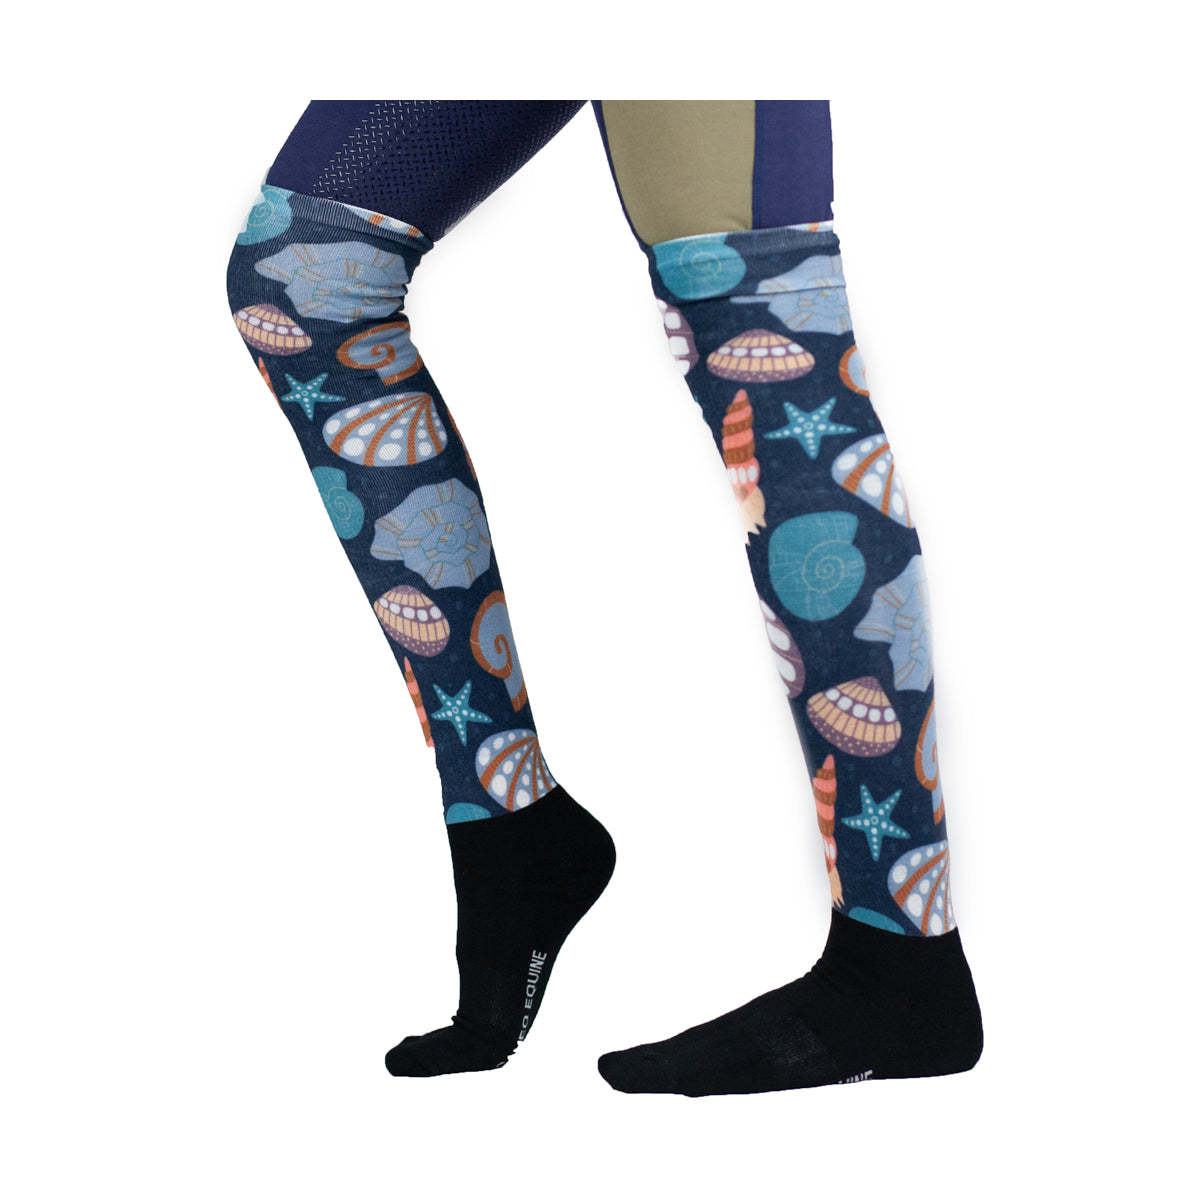 Cameo Equine Marmaduke Socks - Bright and Technical for Comfortable Horse Riding - Just Horse Riders